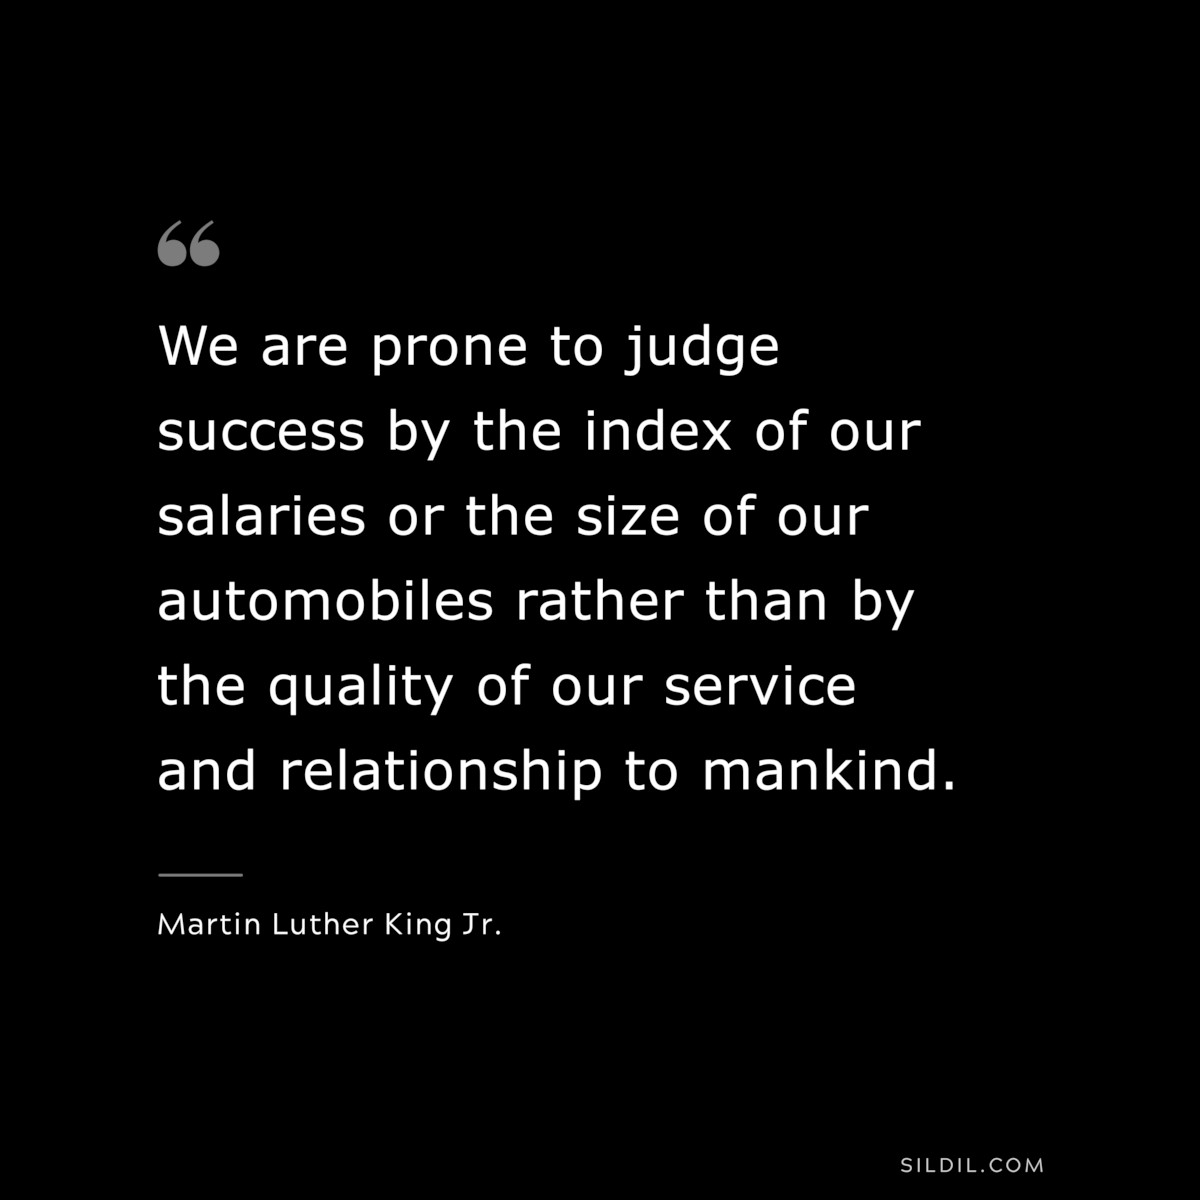 We are prone to judge success by the index of our salaries or the size of our automobiles rather than by the quality of our service and relationship to mankind. ― Martin Luther King Jr.